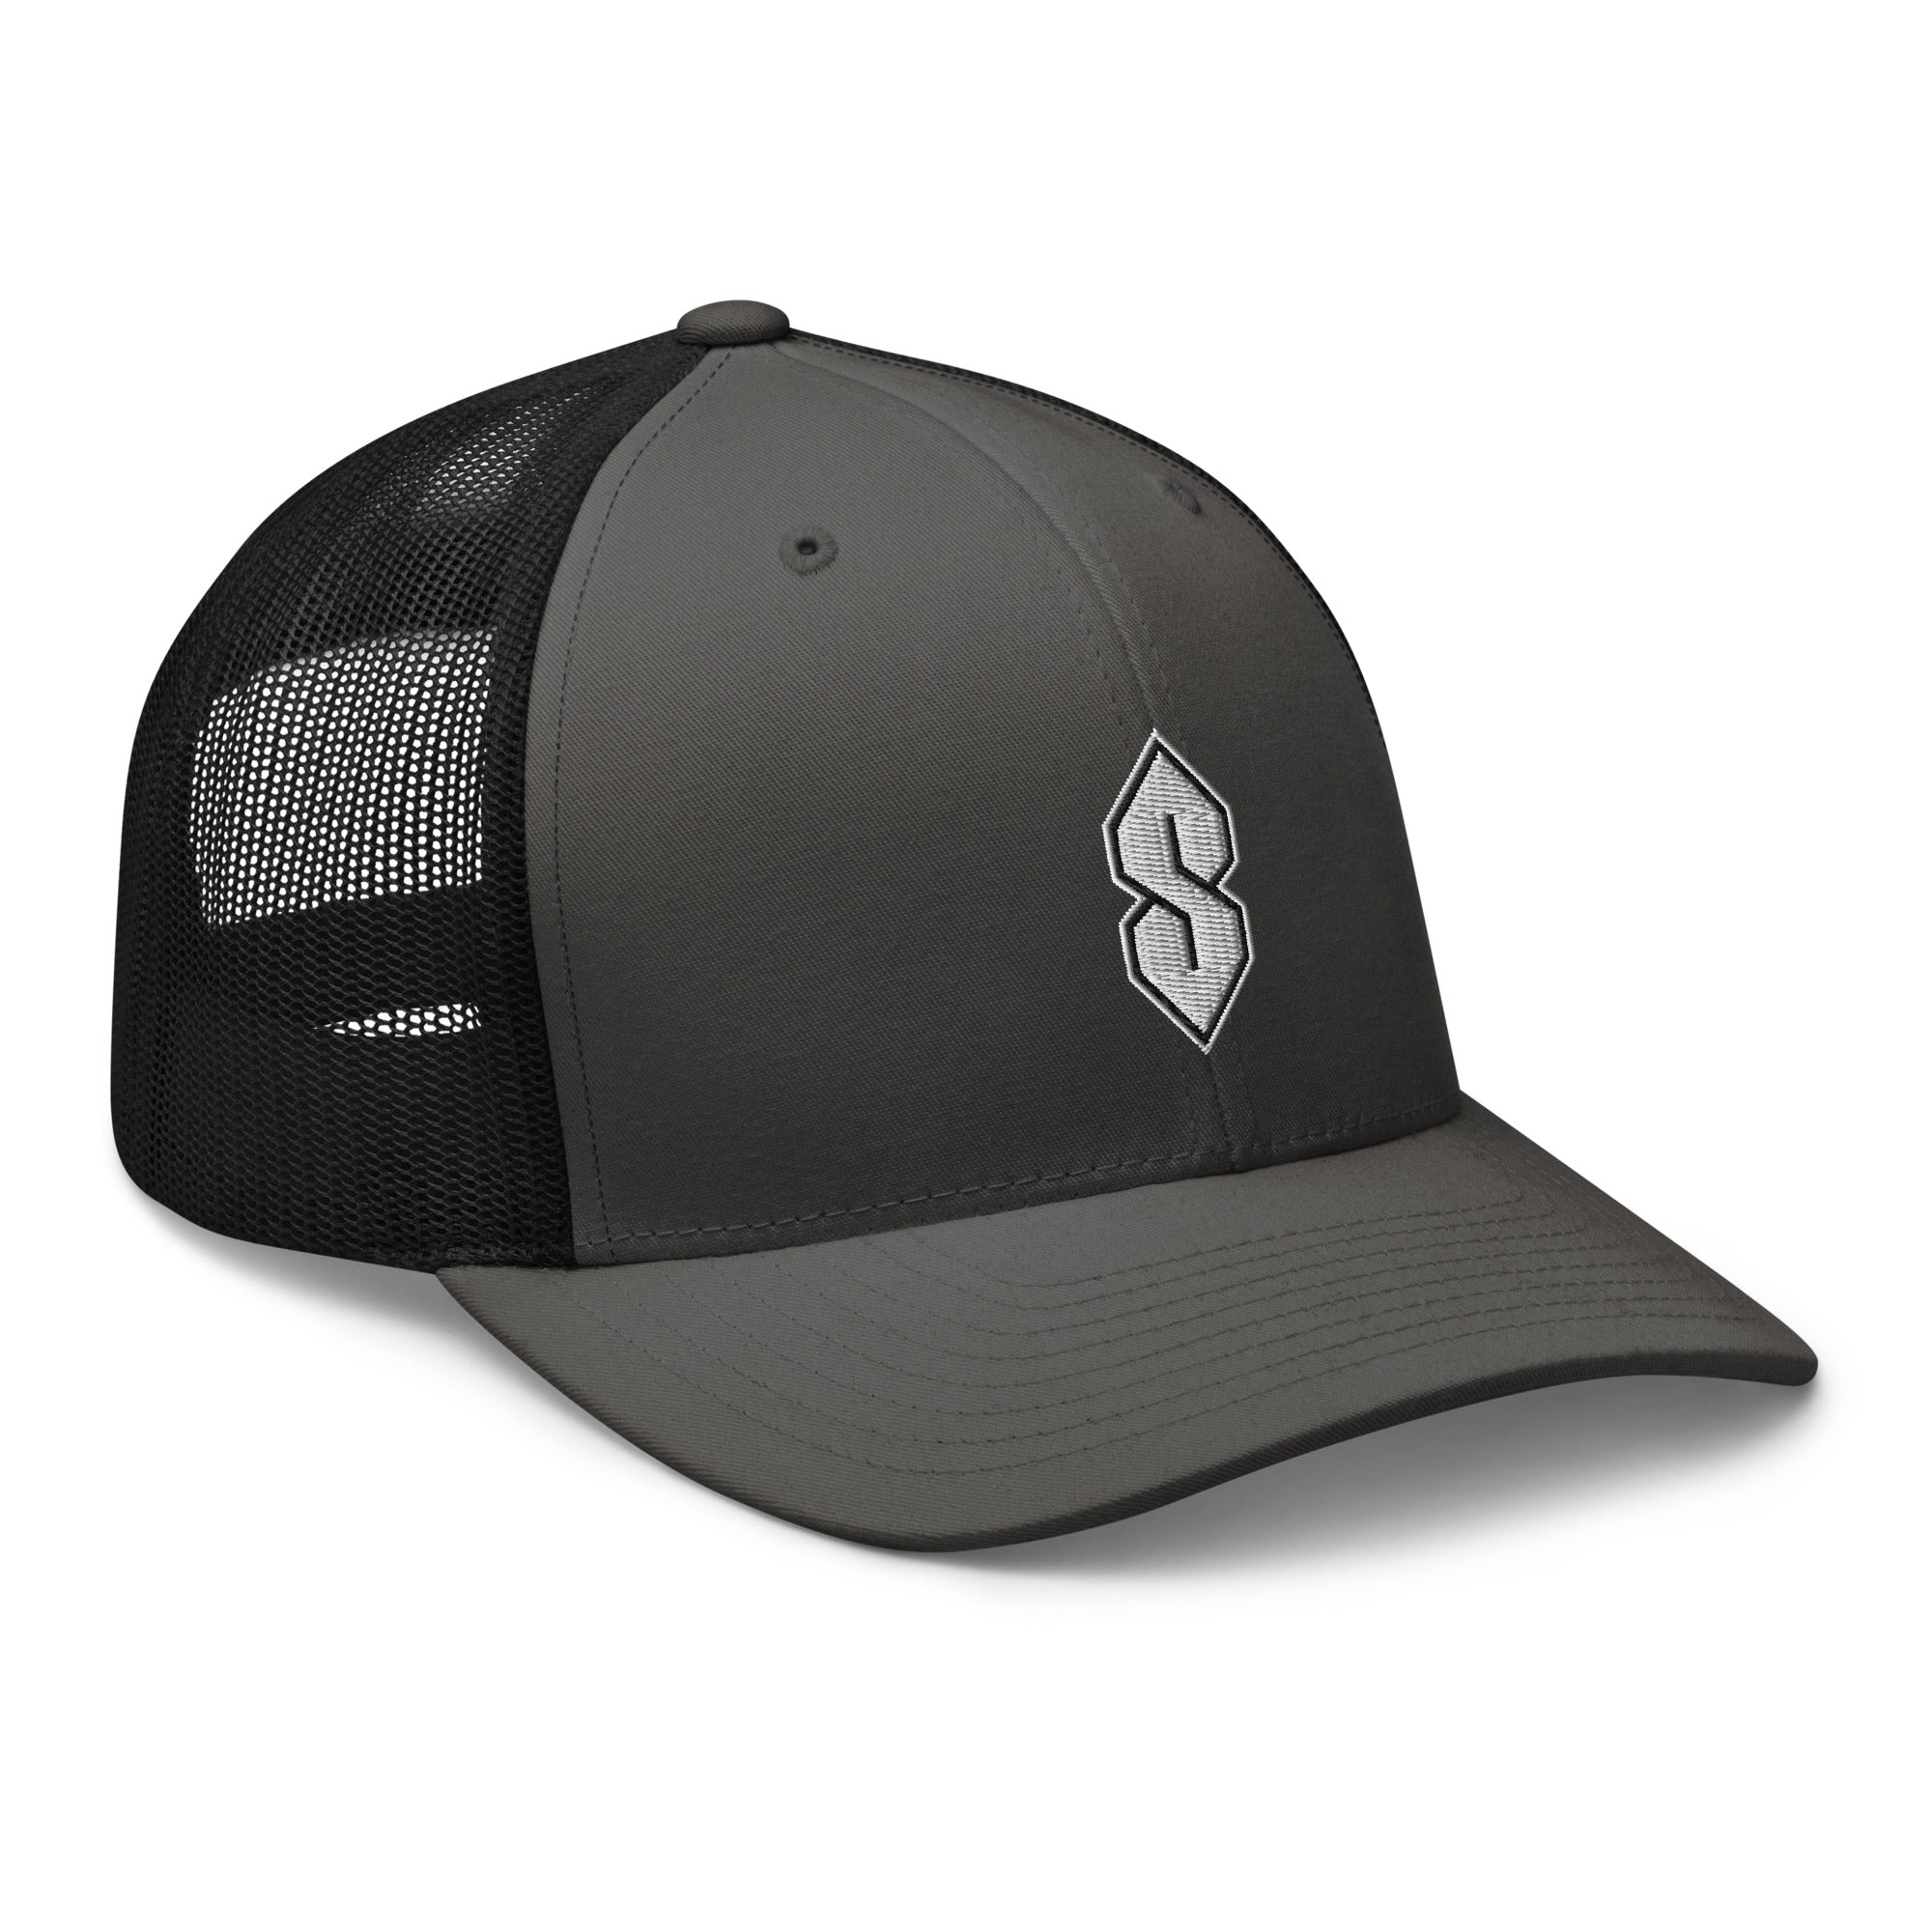 Black Outline Cool S, Graffiti S, Middle School S Embroidered Trucker Cap Snapback Hat